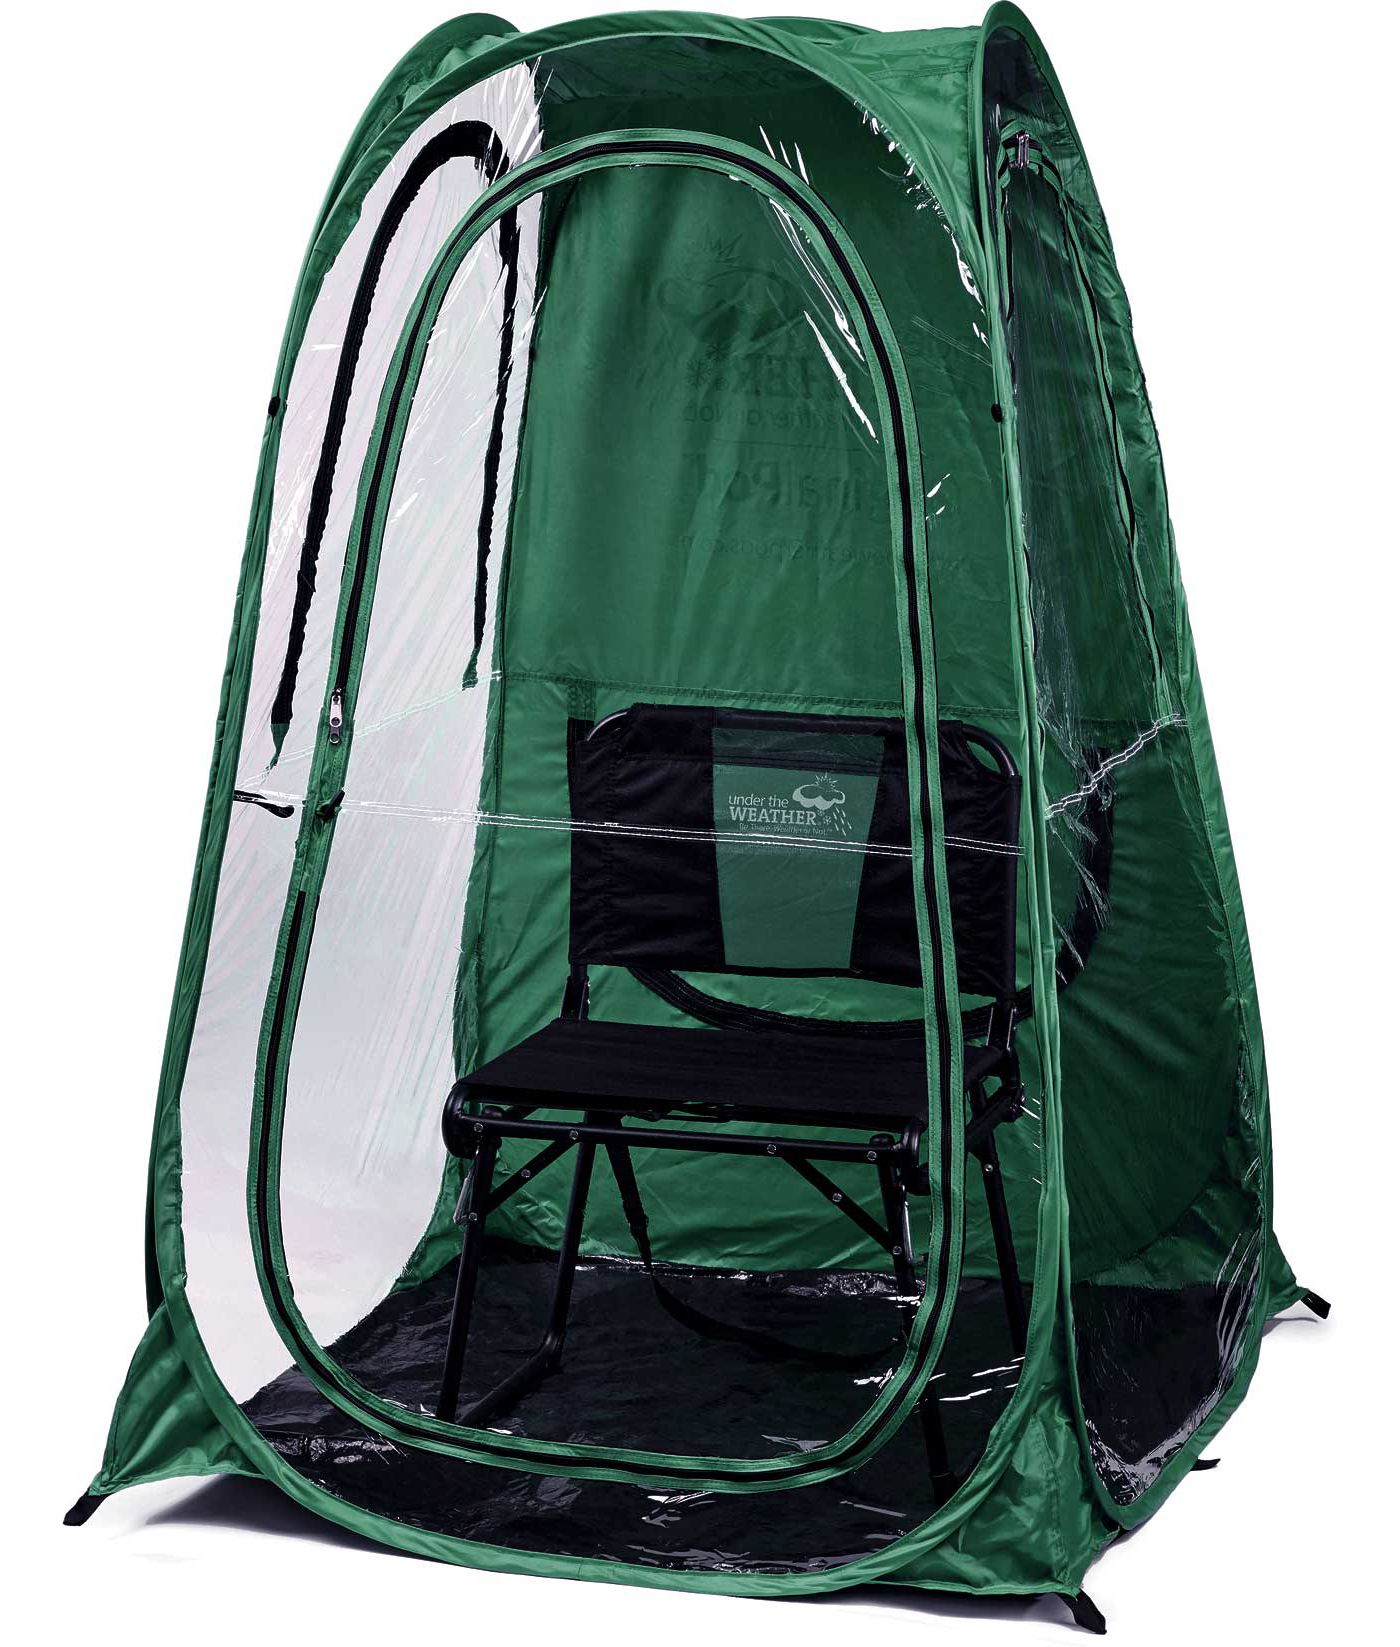 under the weather pop up tent uk